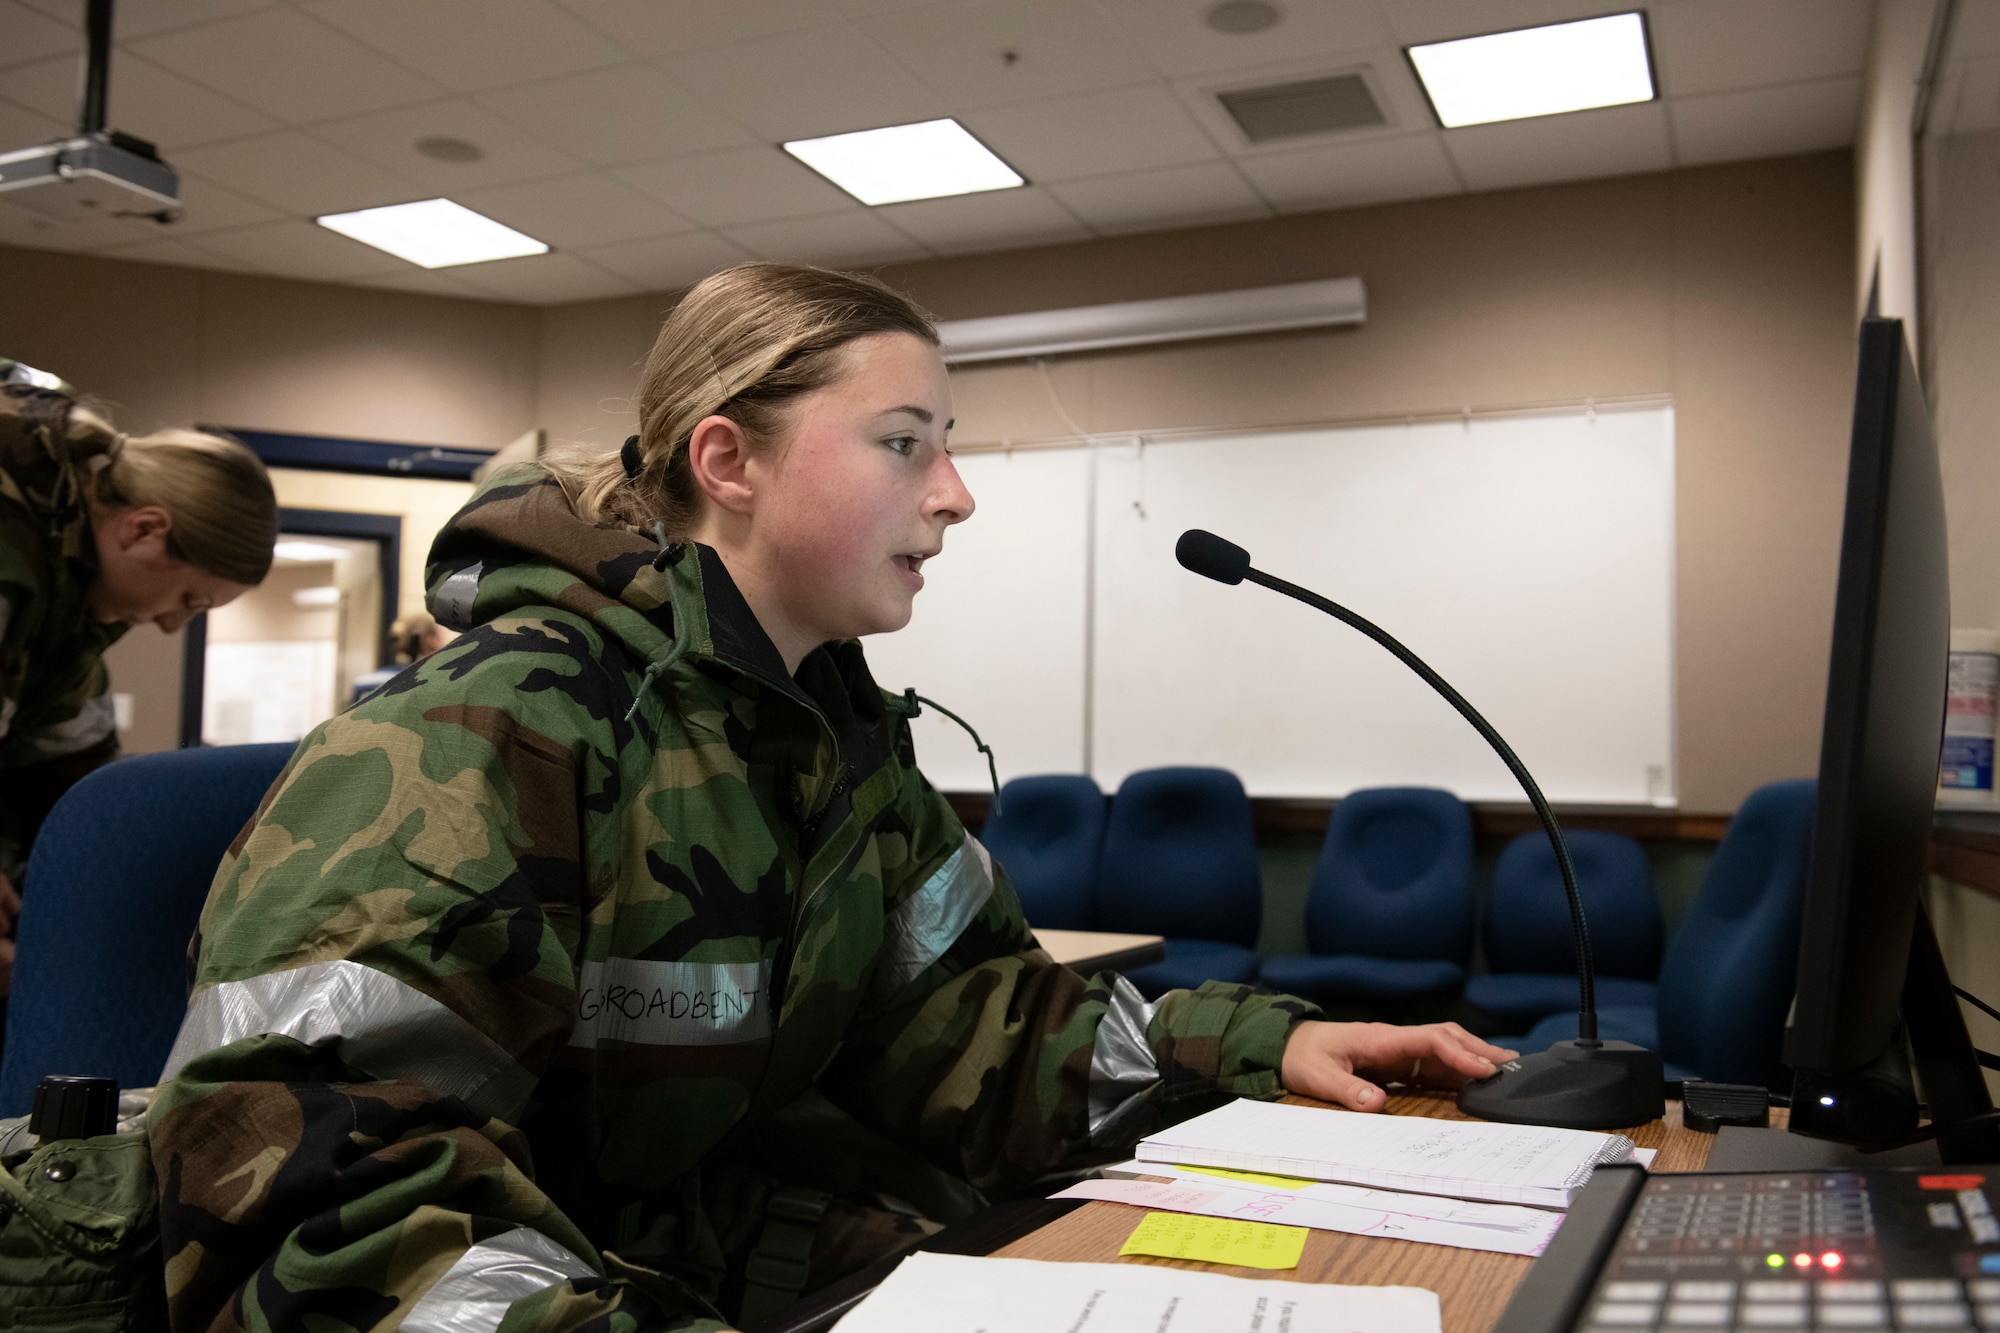 U.S. Air Force Staff Sgt. Charlotte Broadbent, 60th Air Mobility Wing Command Post controller, speaks into the giant voice system at the Alpena Combat Readiness Training Center, Alpena, Michigan, April 12, 2022. Broadbent is wearing MOPP gear, seated, and speaking into a small microphone.